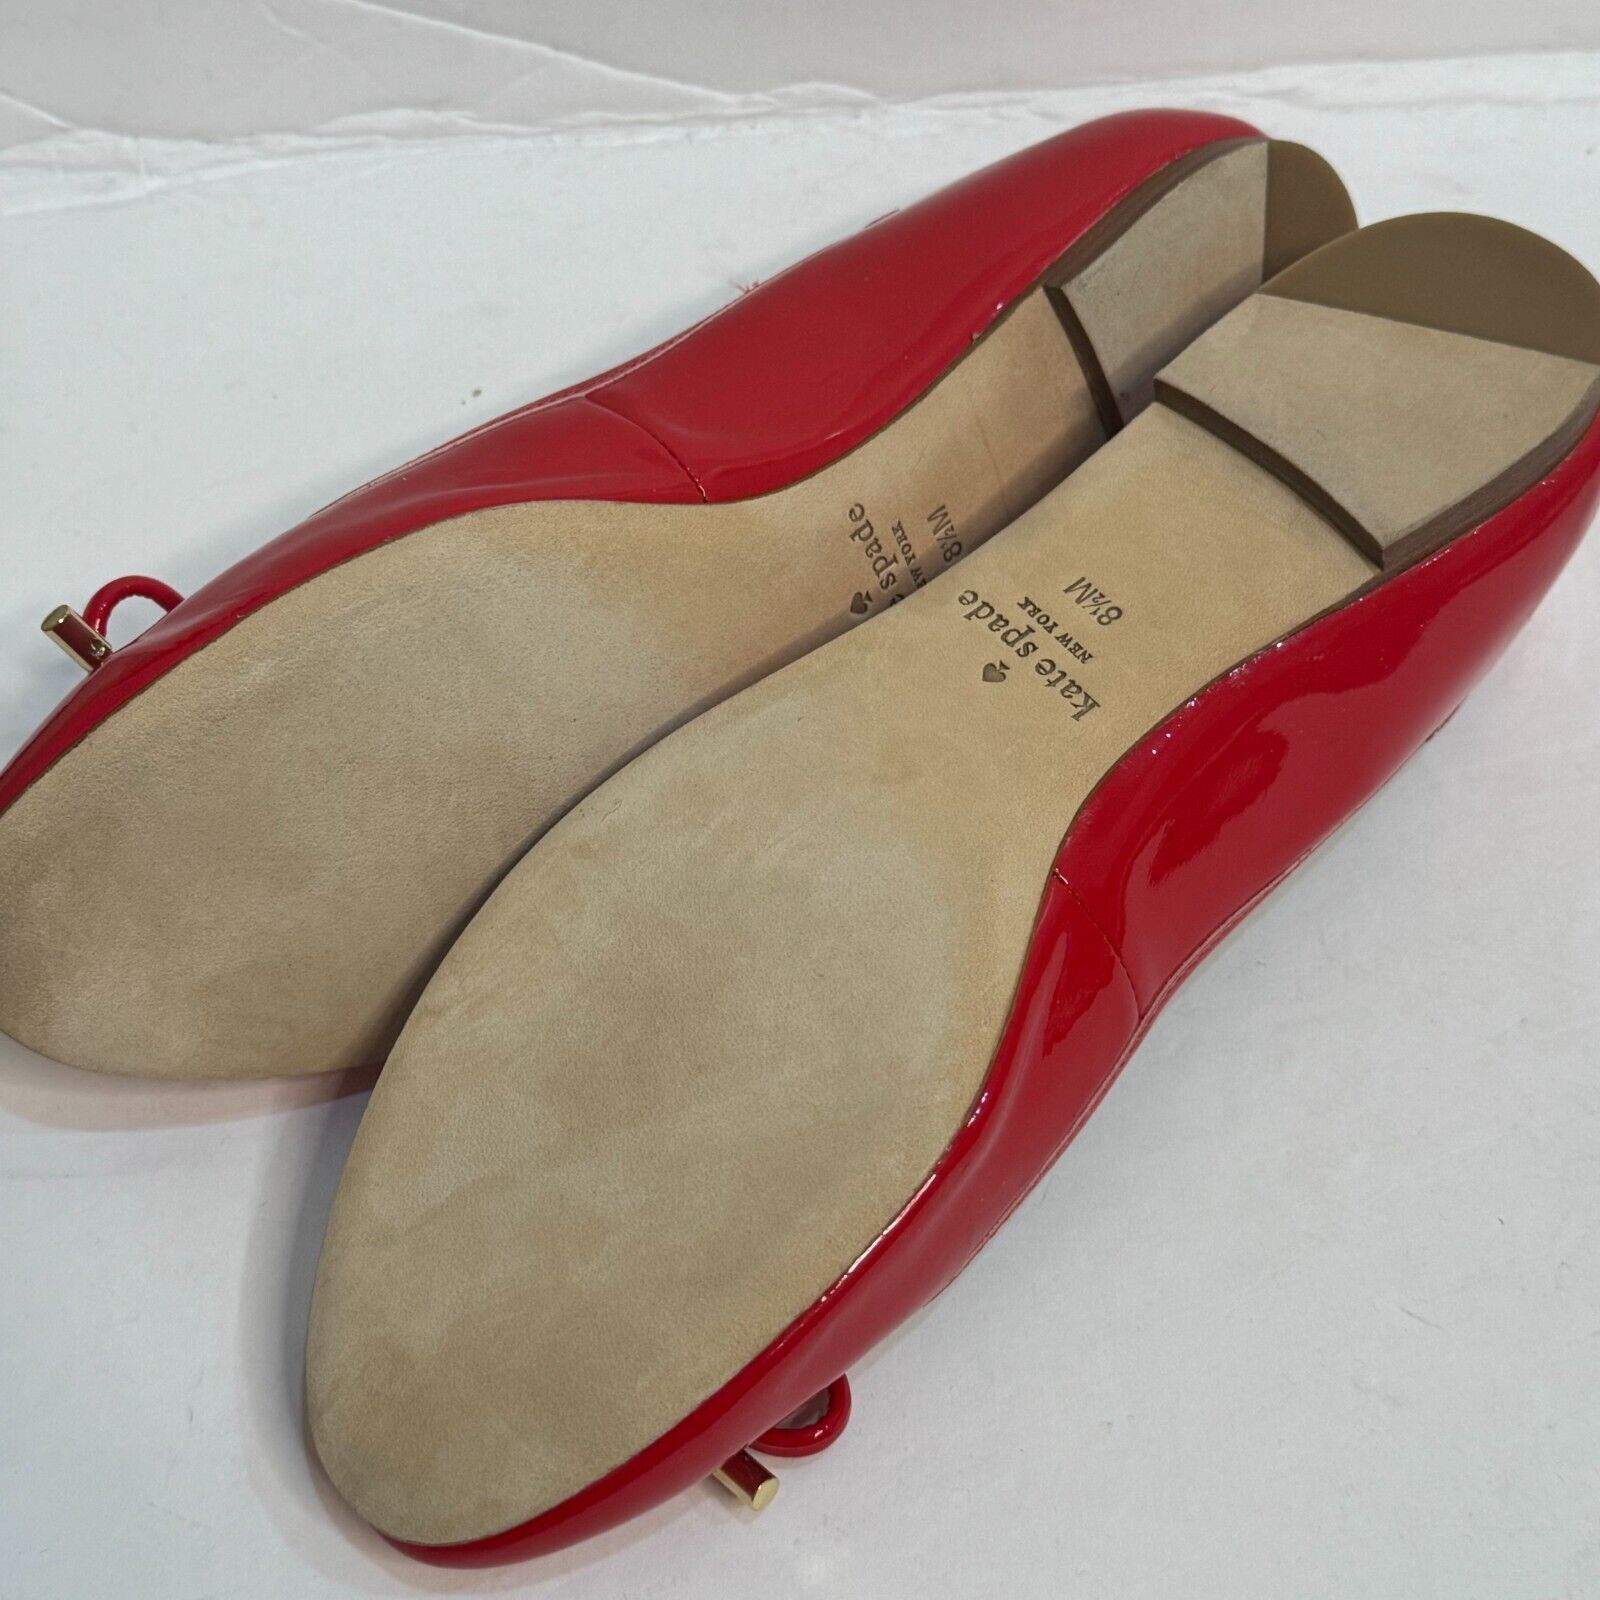 Kate Spade Willa Maraschino Red Patent Leather Flats Size 8.5